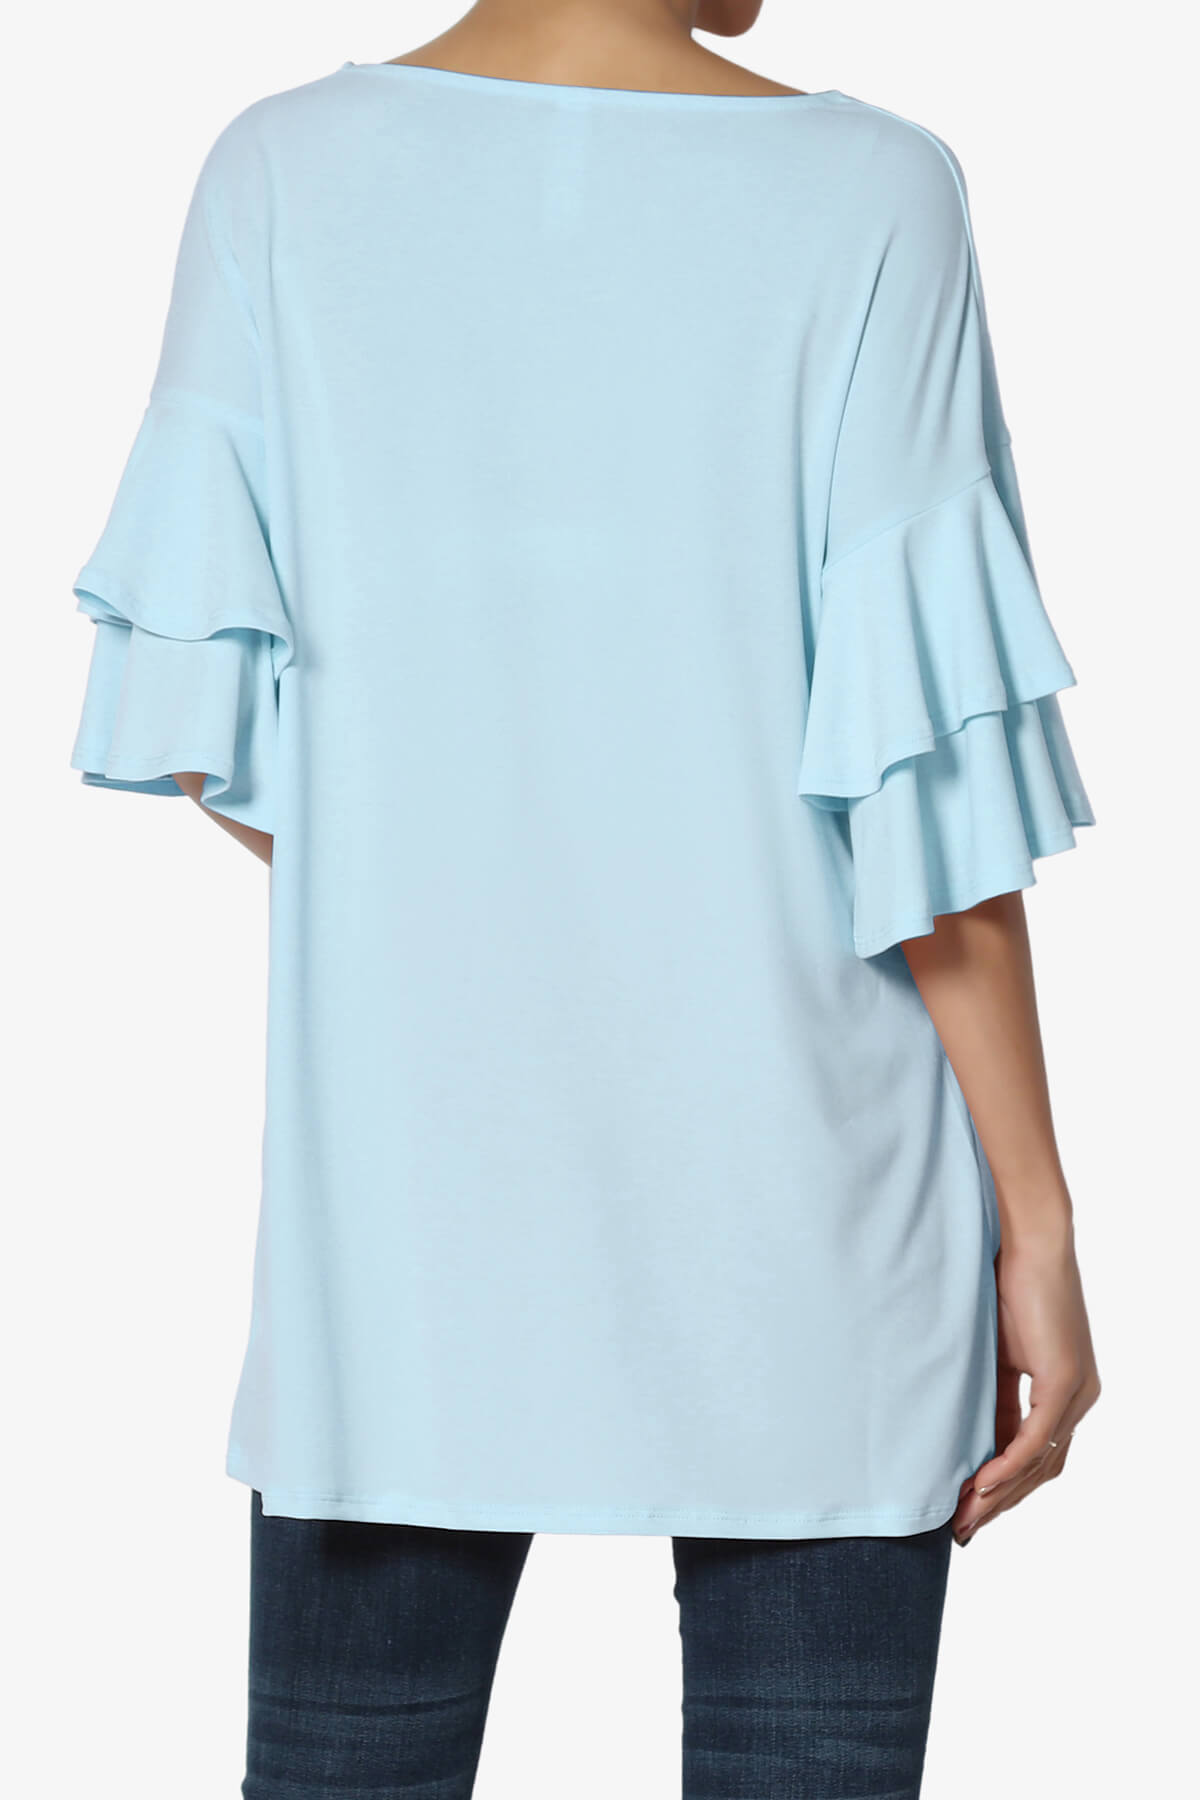 Bell 3/4 Sleeve – Loose TheMogan Casual T-Shirt Neck Tiered Boat Shirt Blouse Top